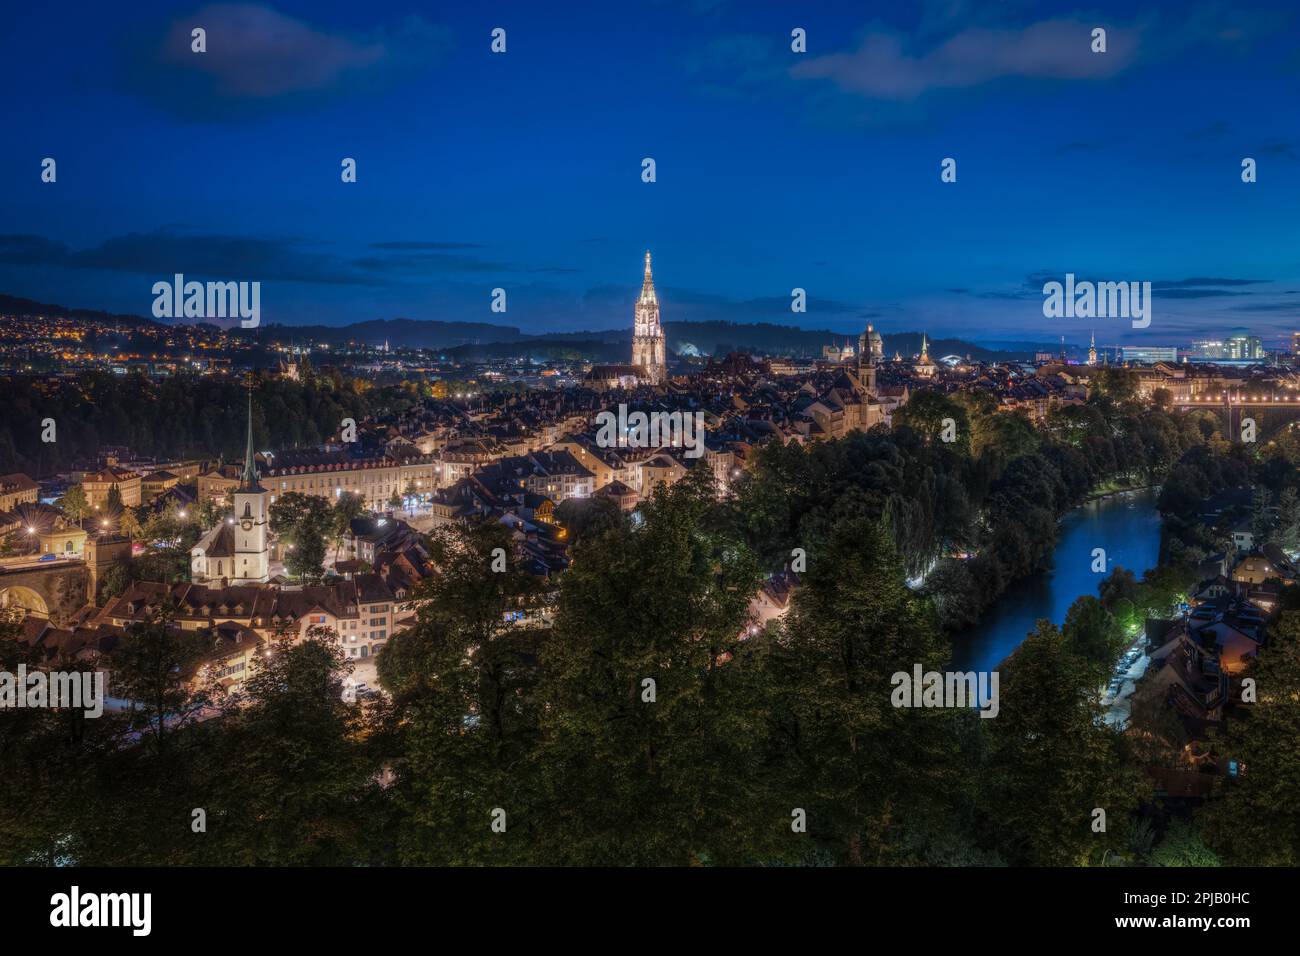 Scenic night panorama of Bern Old Town seen from Rose Garden viewpoint, Switzerland Stock Photo